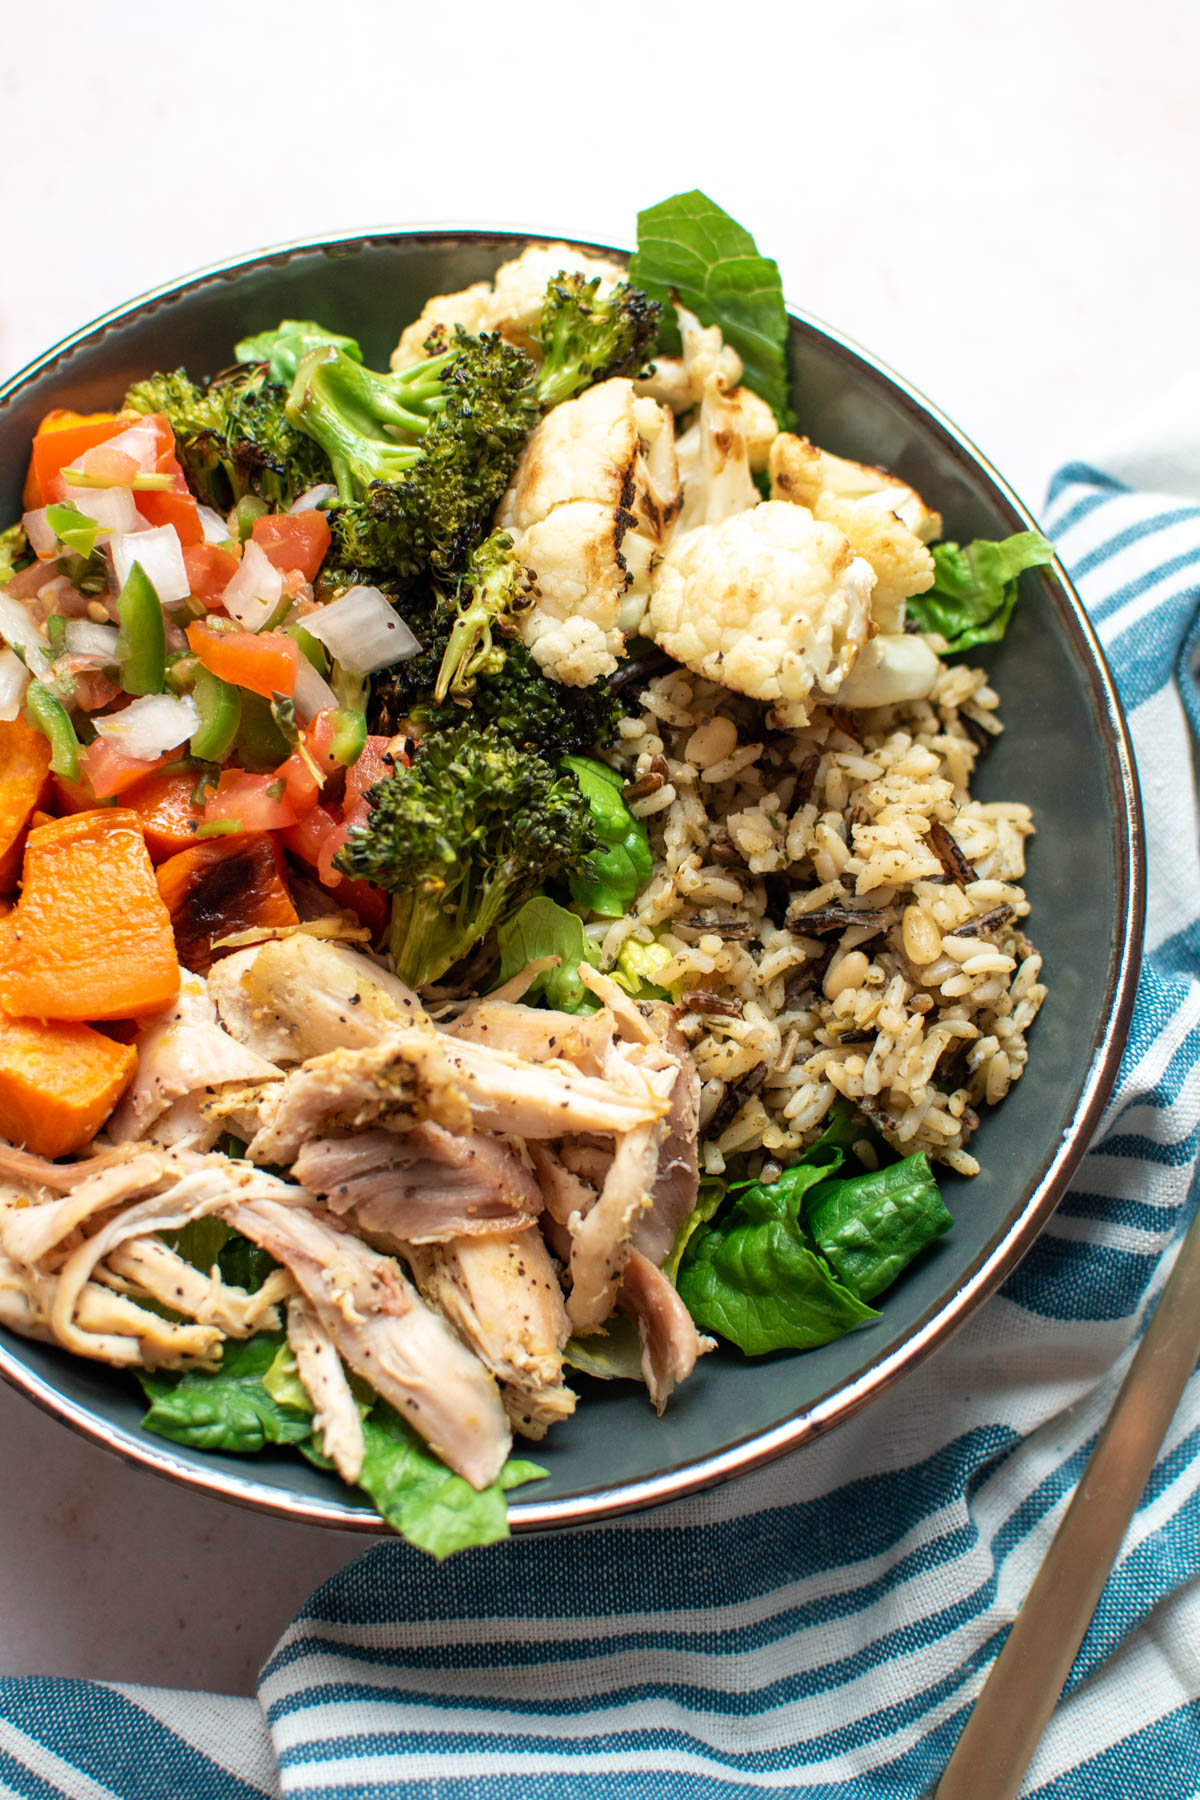 Chicken power bowl with roasted cauliflower, broccoli, and sweet potatoes on table.